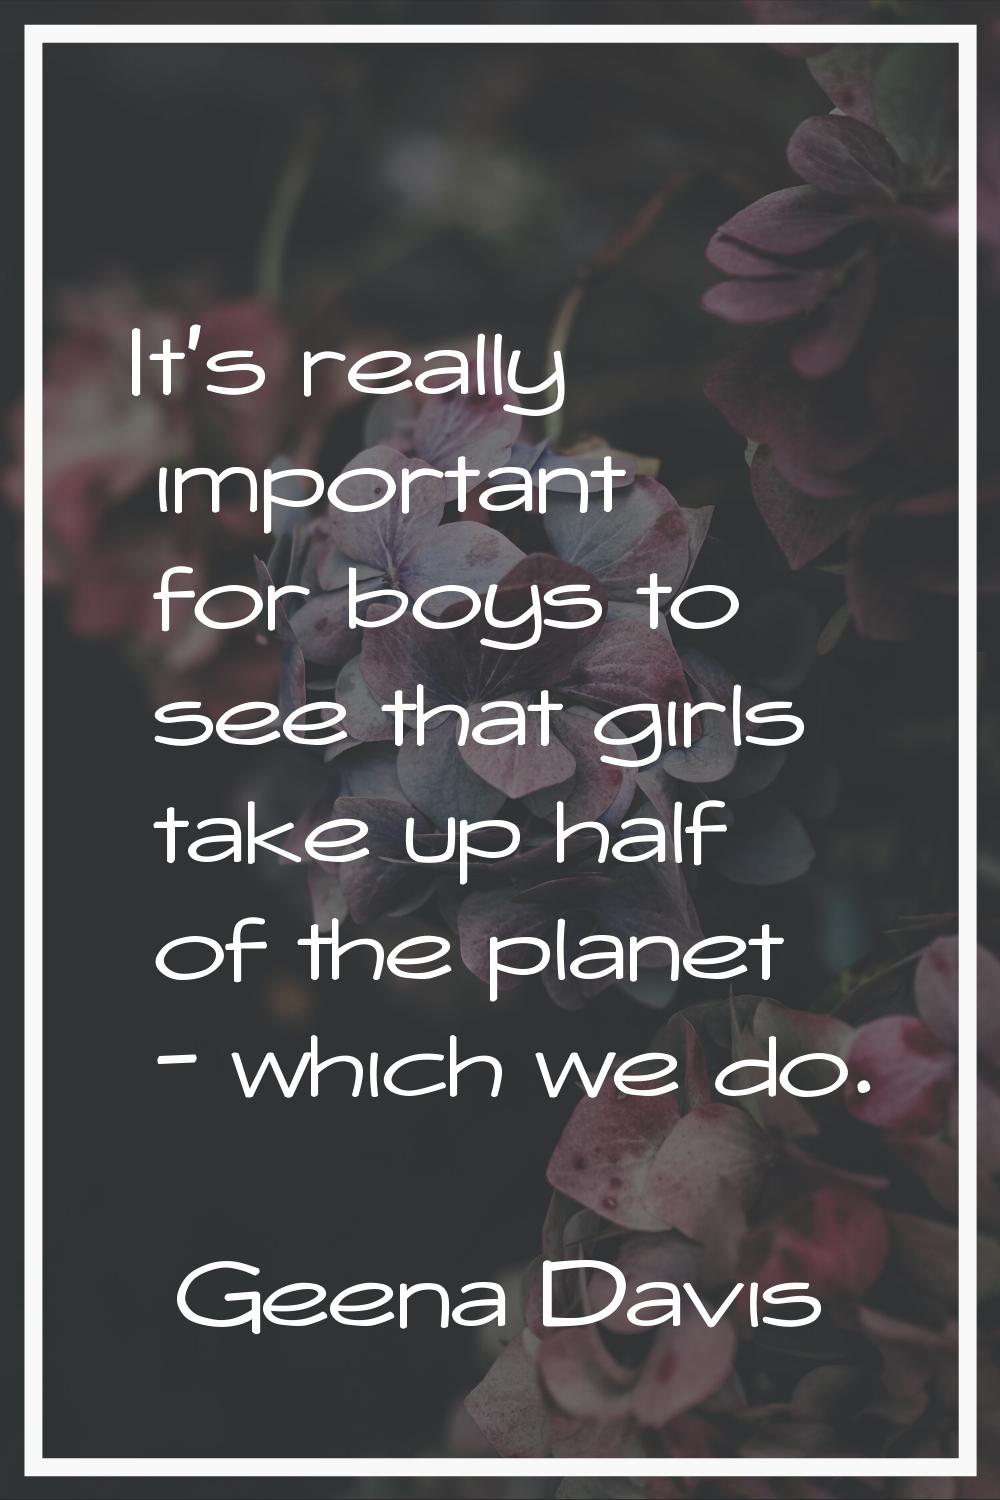 It's really important for boys to see that girls take up half of the planet - which we do.